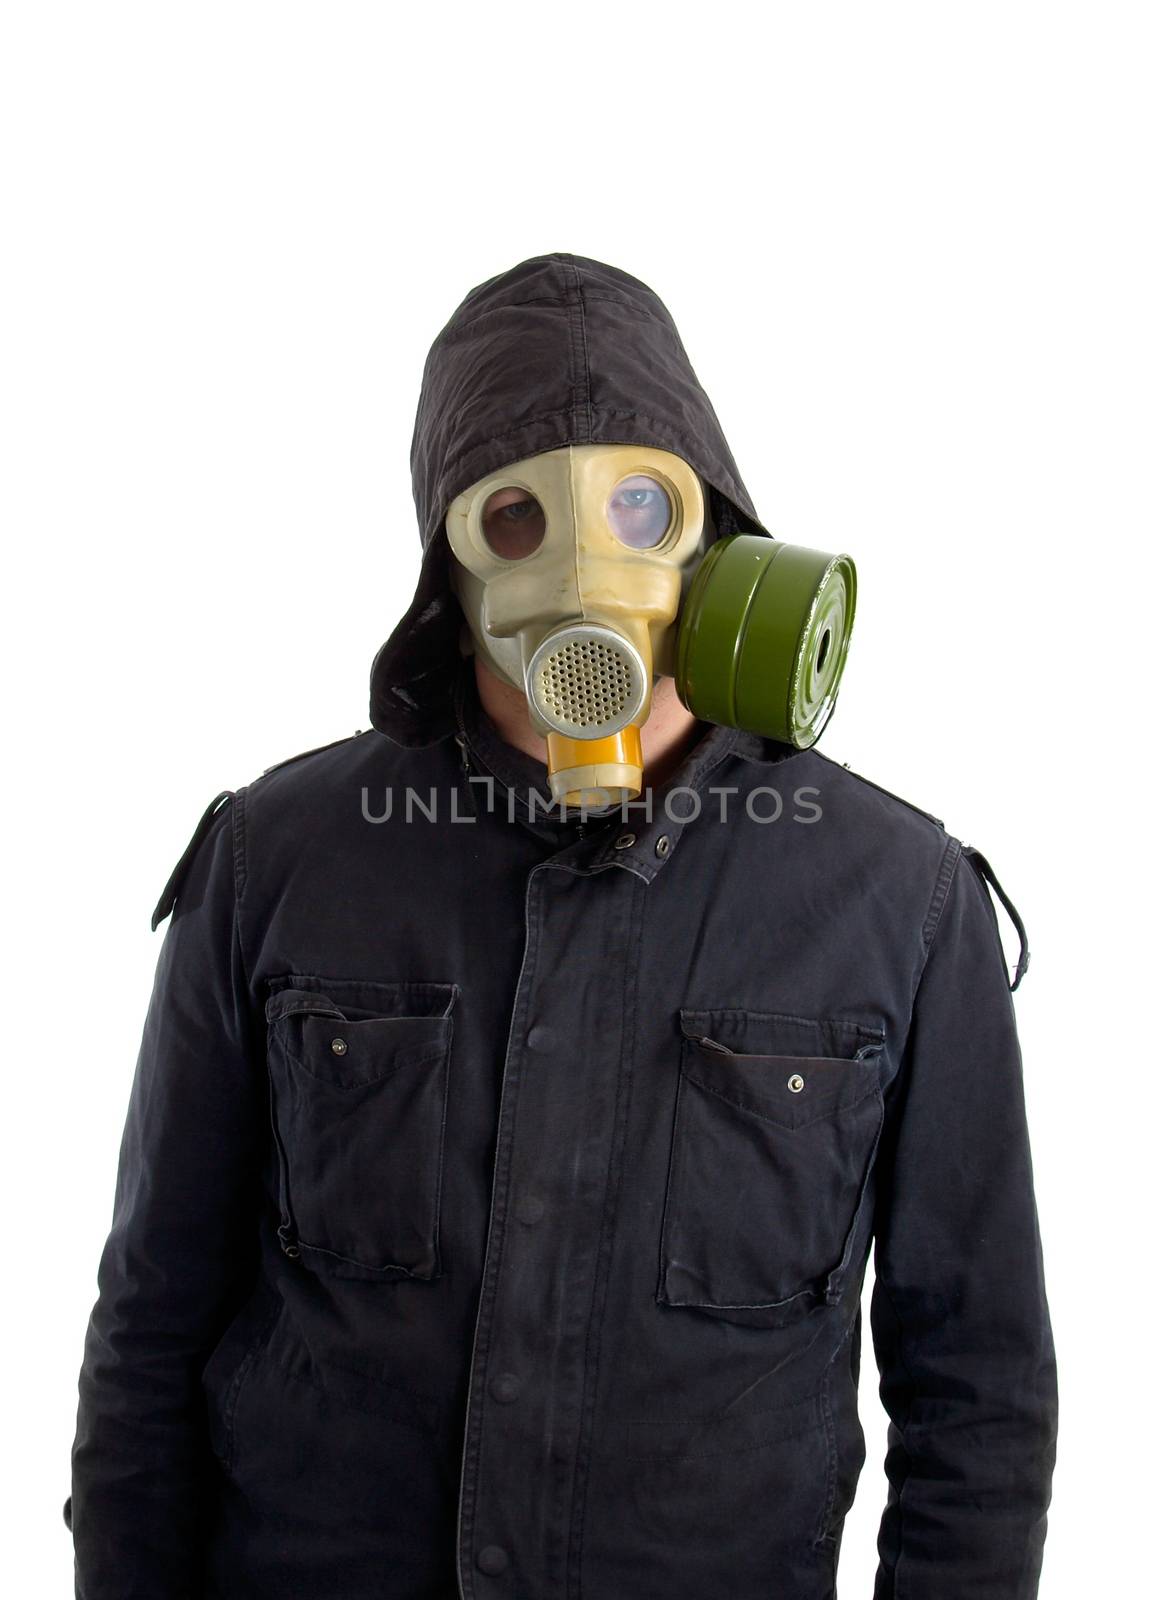 Man in gas mask against white background